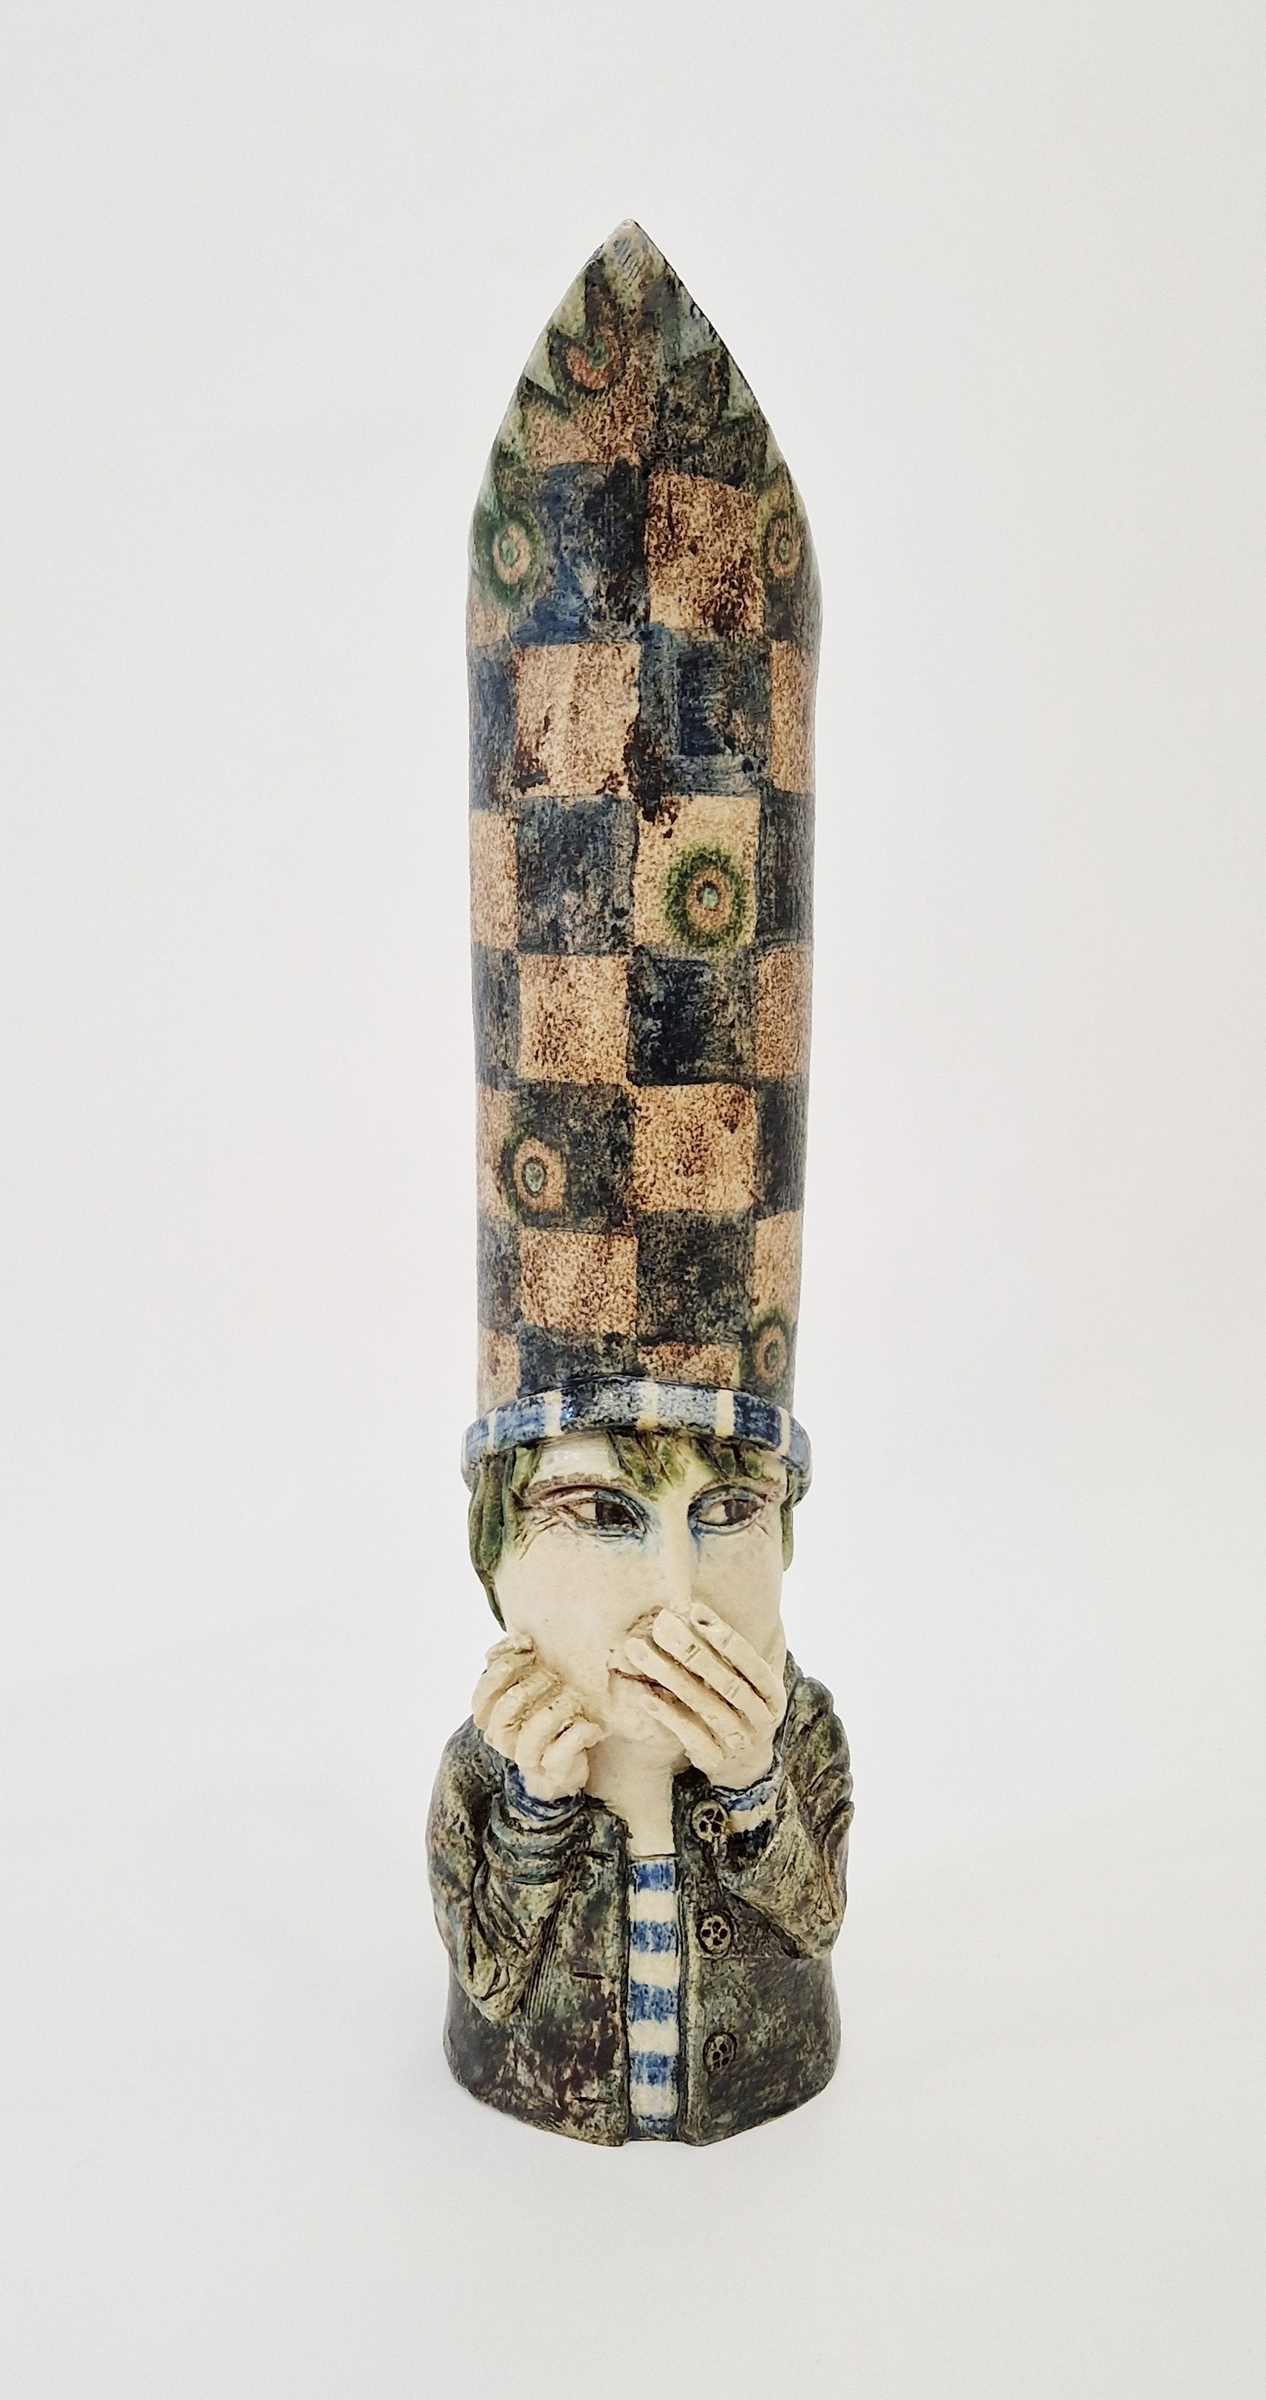 Amanda Popham (b.1954) 'What a Tall Hat' studio pottery jug modelled as a figure with hand - Image 2 of 3